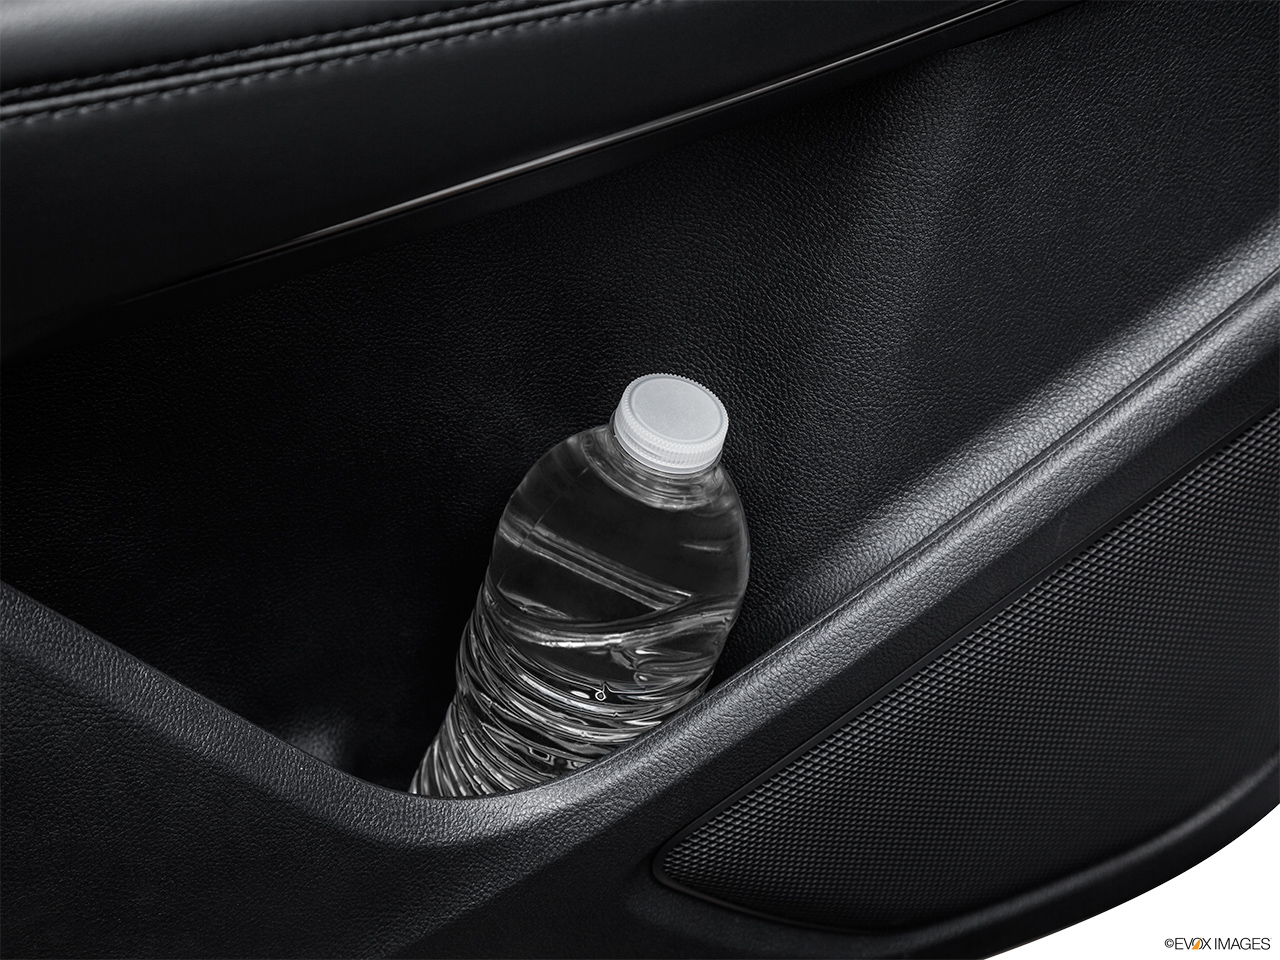 2015 Lincoln MKC Base Second row side cup holder with coffee prop, or second row door cup holder with water bottle. 